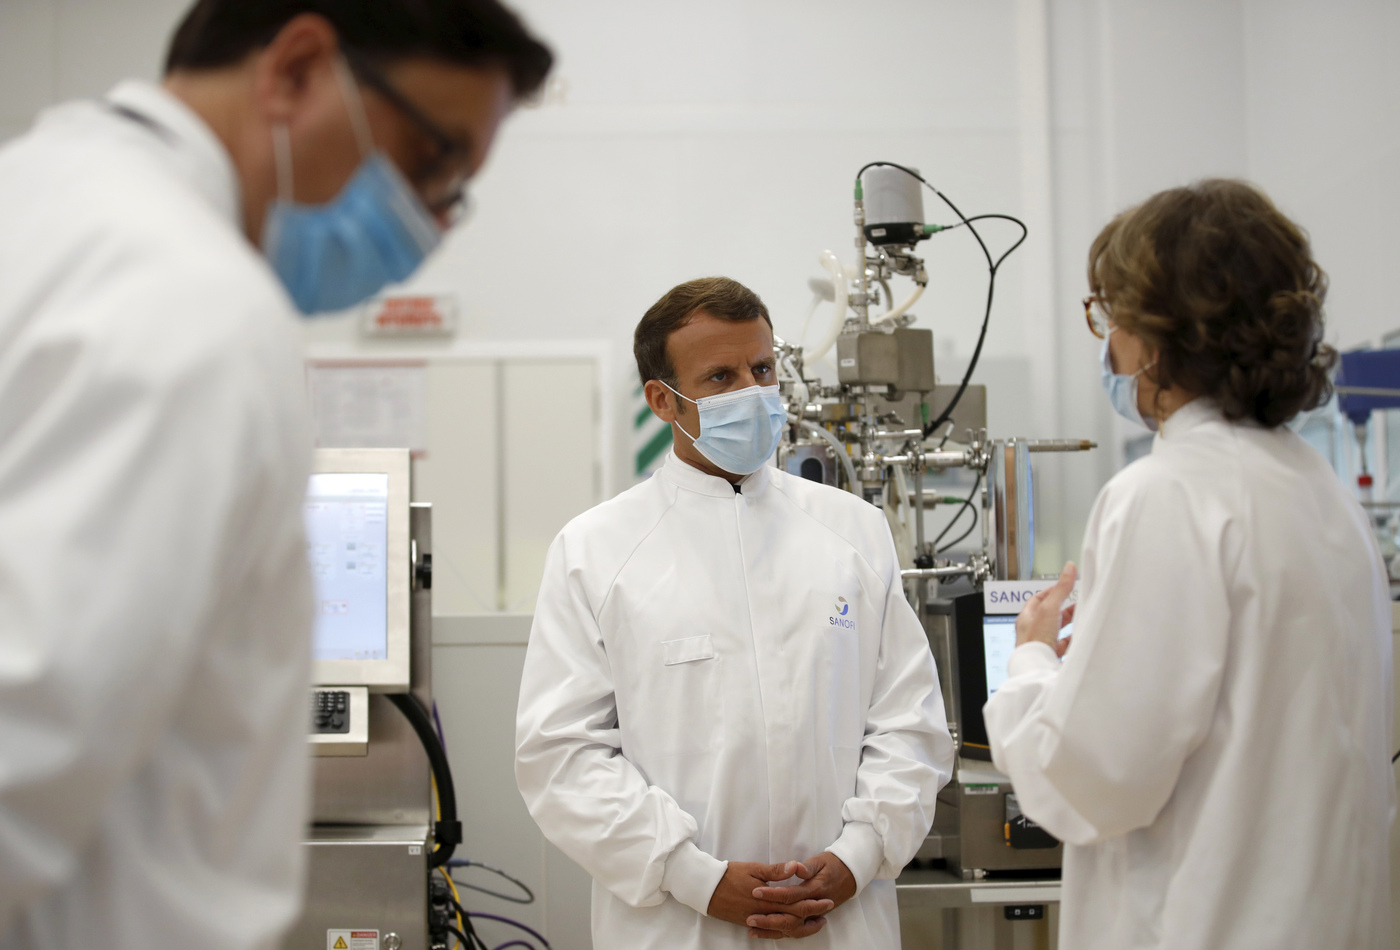 French President Emmanuel Macron, wearing a protective face mask, listens to researchers as he visits an industrial development laboratory at the French drugmaker's vaccine unit Sanofi Pasteur plant in Marcy-l'Etoile, near Lyon, central France, Tuesday, June 16, 2020. The visit comes after rival pharmaceutical company AstraZeneca this weekend announced a deal to supply 400 million vaccine doses to EU countries, including France. (Gonzalo Fuentes/Pool via AP)